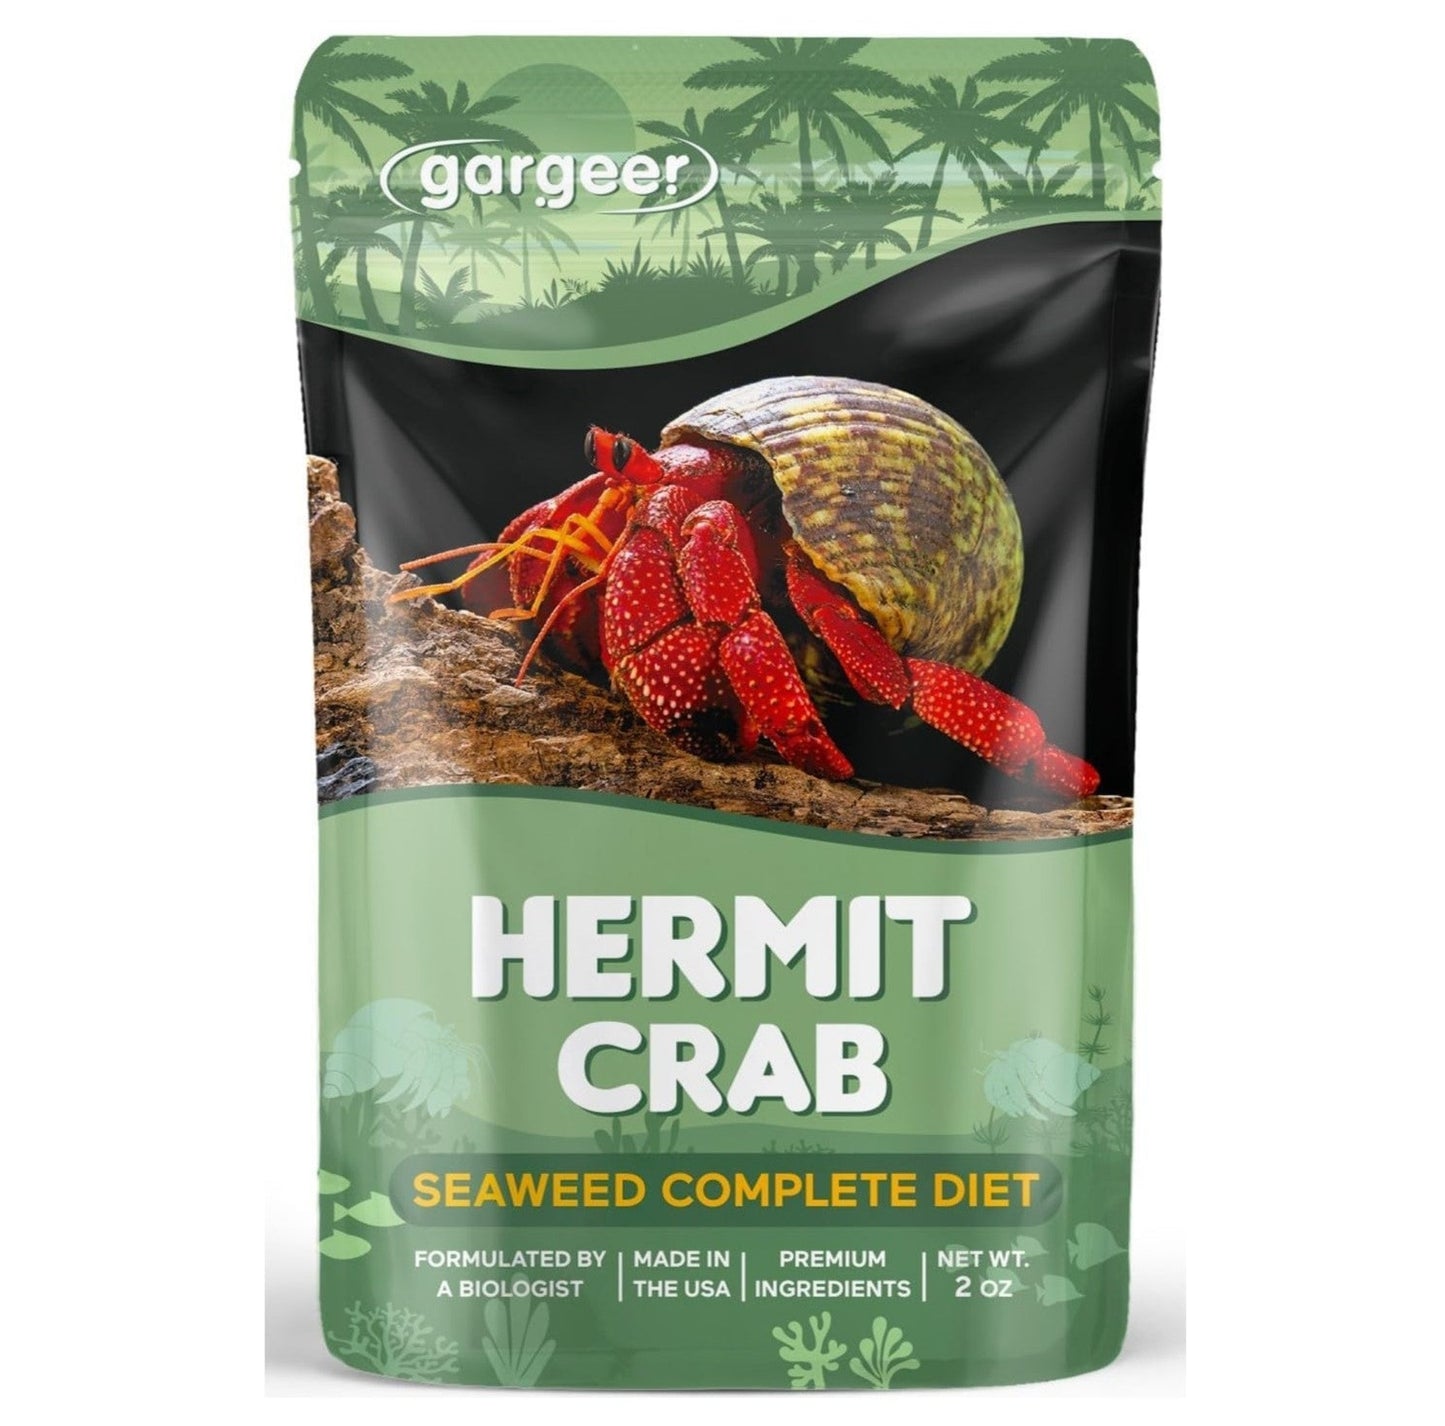 Gargeer 2oz Hermit Crab Seaweed Bounty Complete Diet. Easily Digested, Non-GMO Premium Ingredients Only. Strengthen Your Crab’s Exoskeleton, and Support All Nutritional and Immune System Needs. Enjoy!